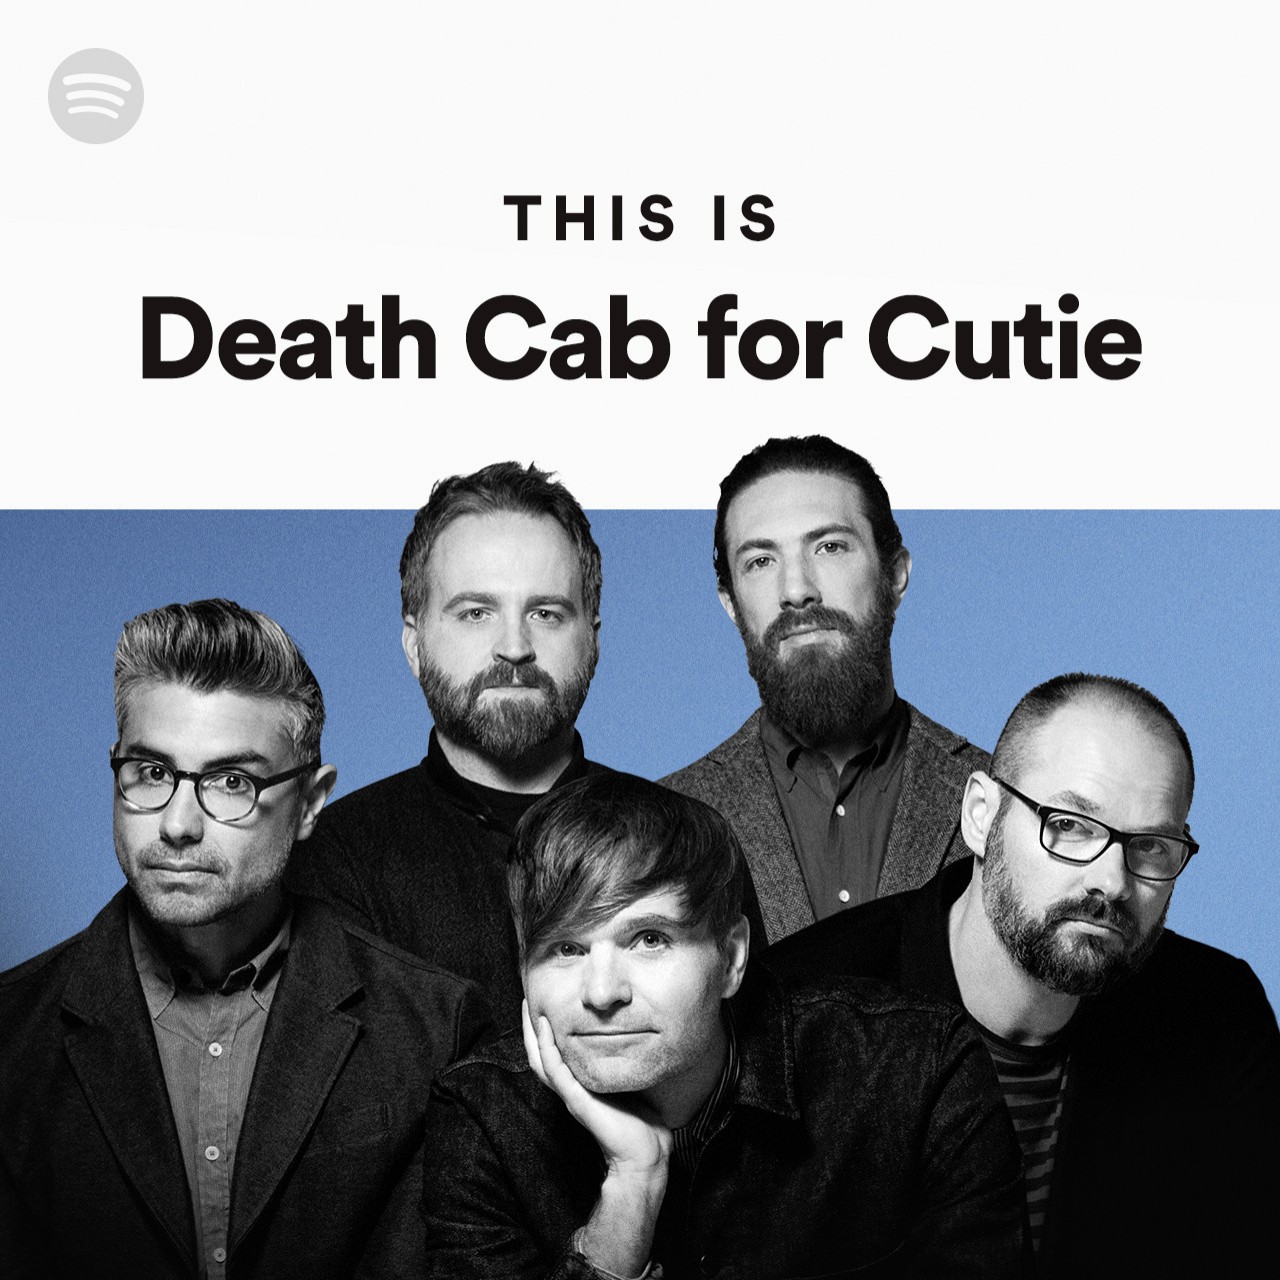 This Is Death Cab for Cutie